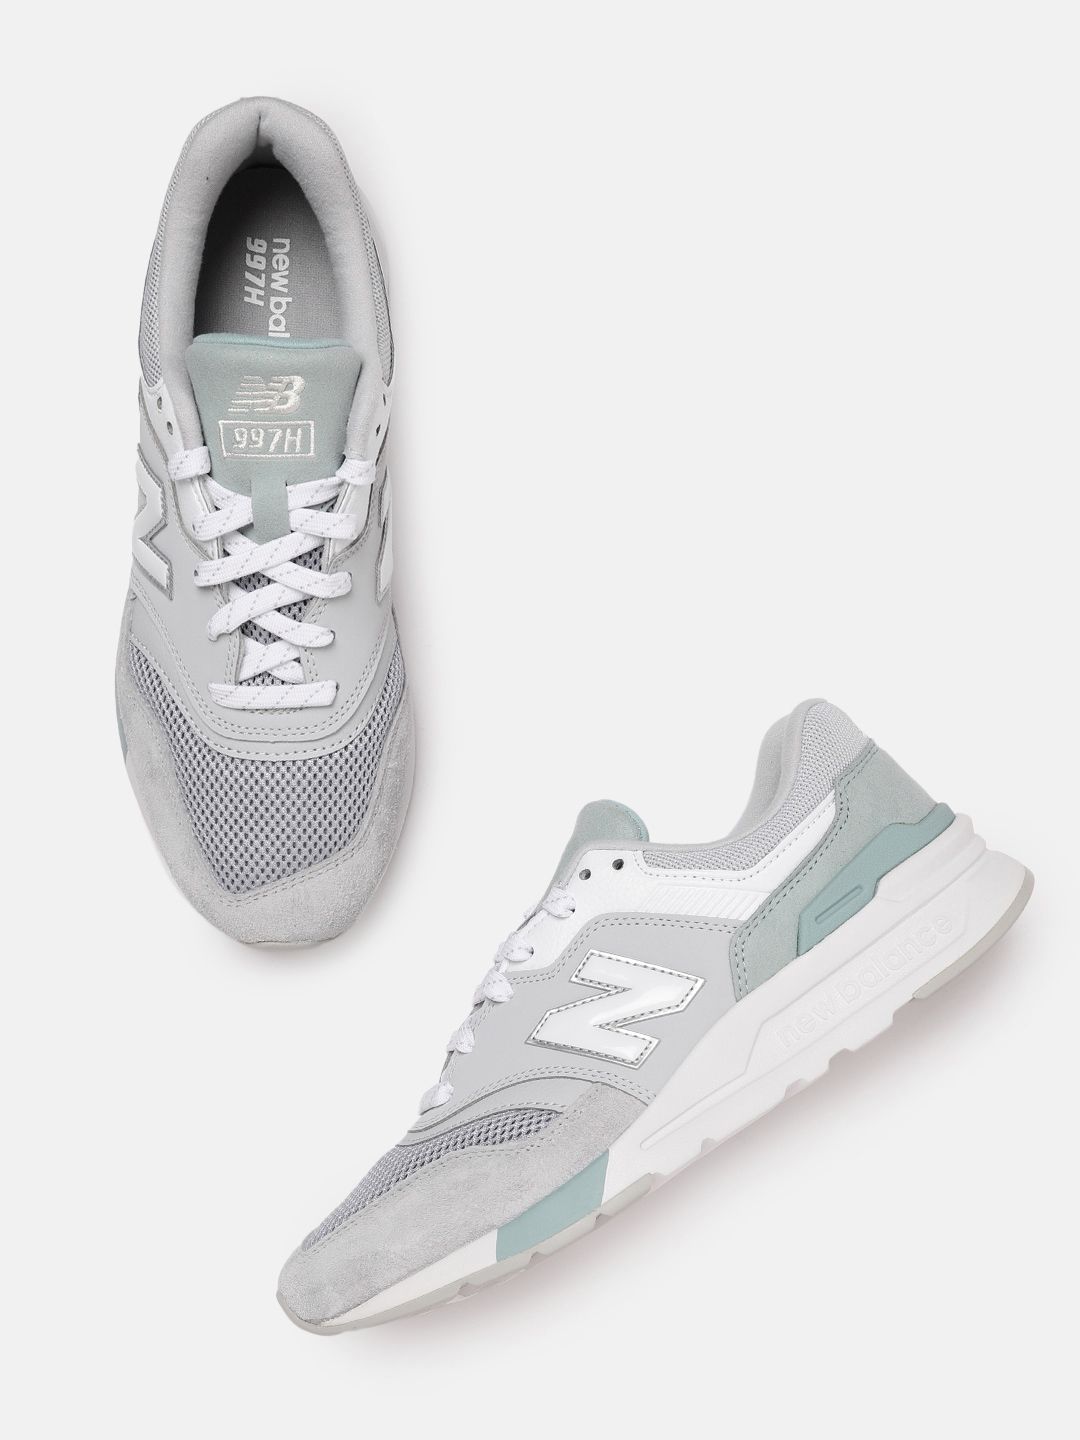 New Balance Women Grey Woven Design Sneakers Price in India